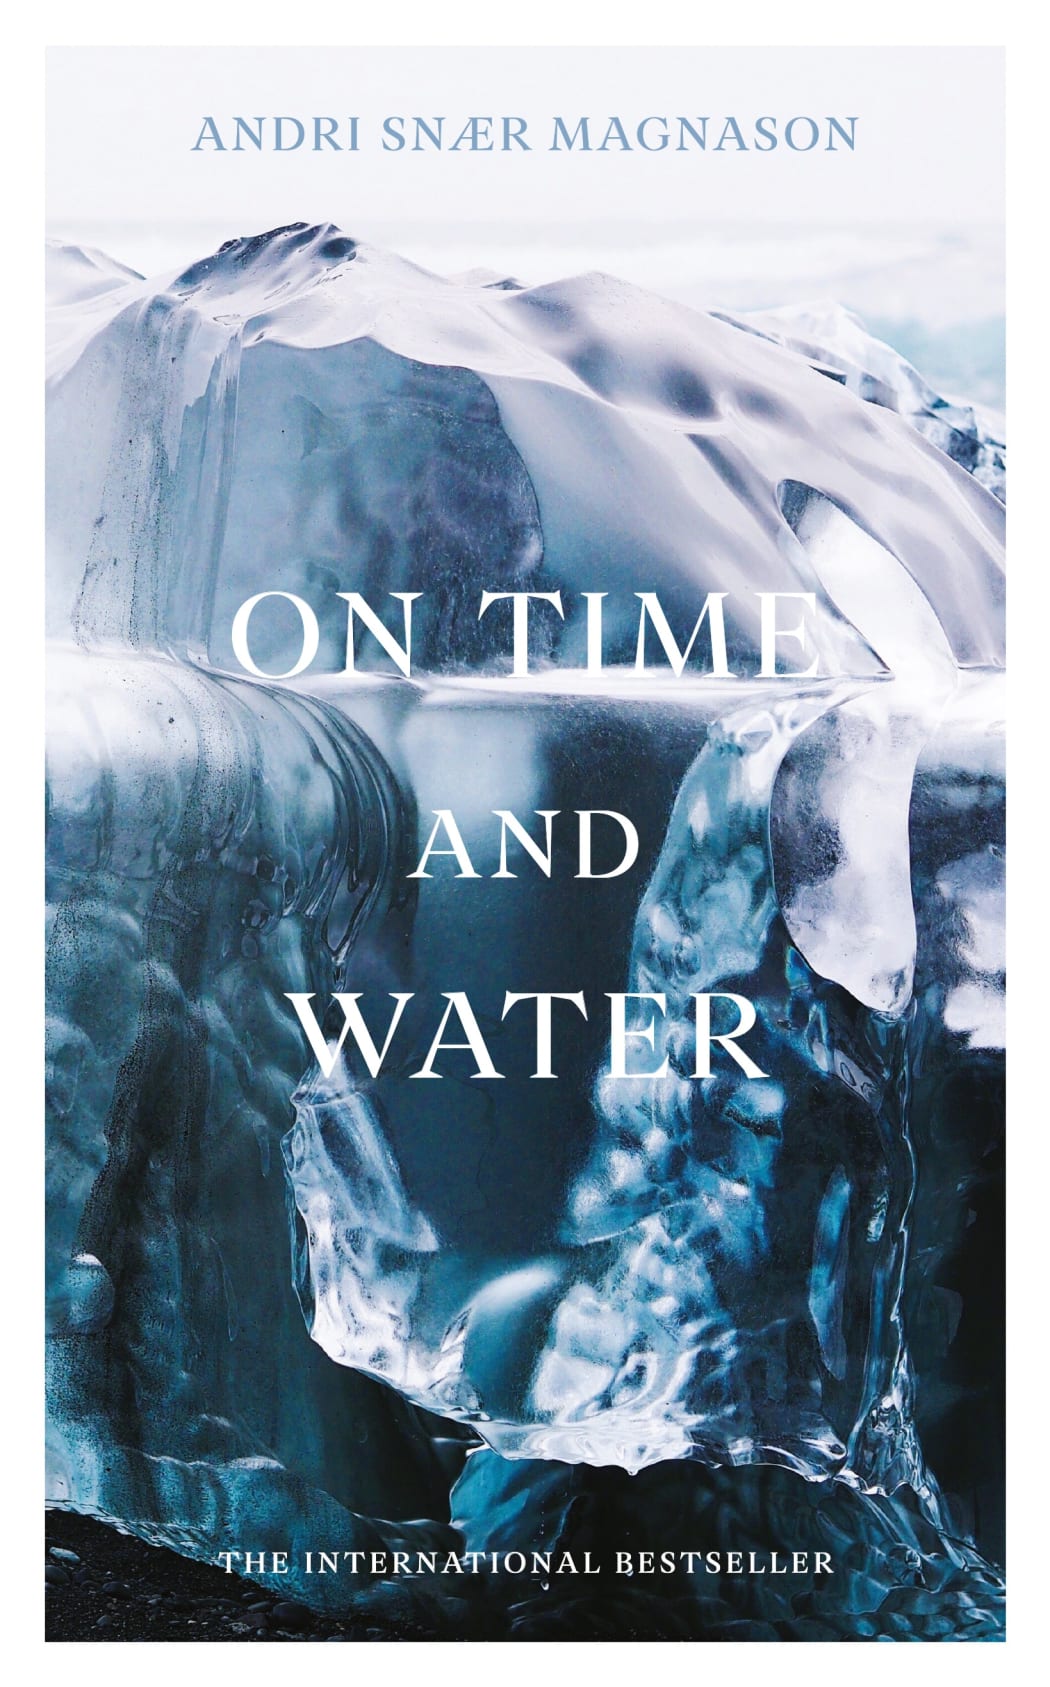 "On Time and Water",by Icelandic author Andri Snaer Magnason. 